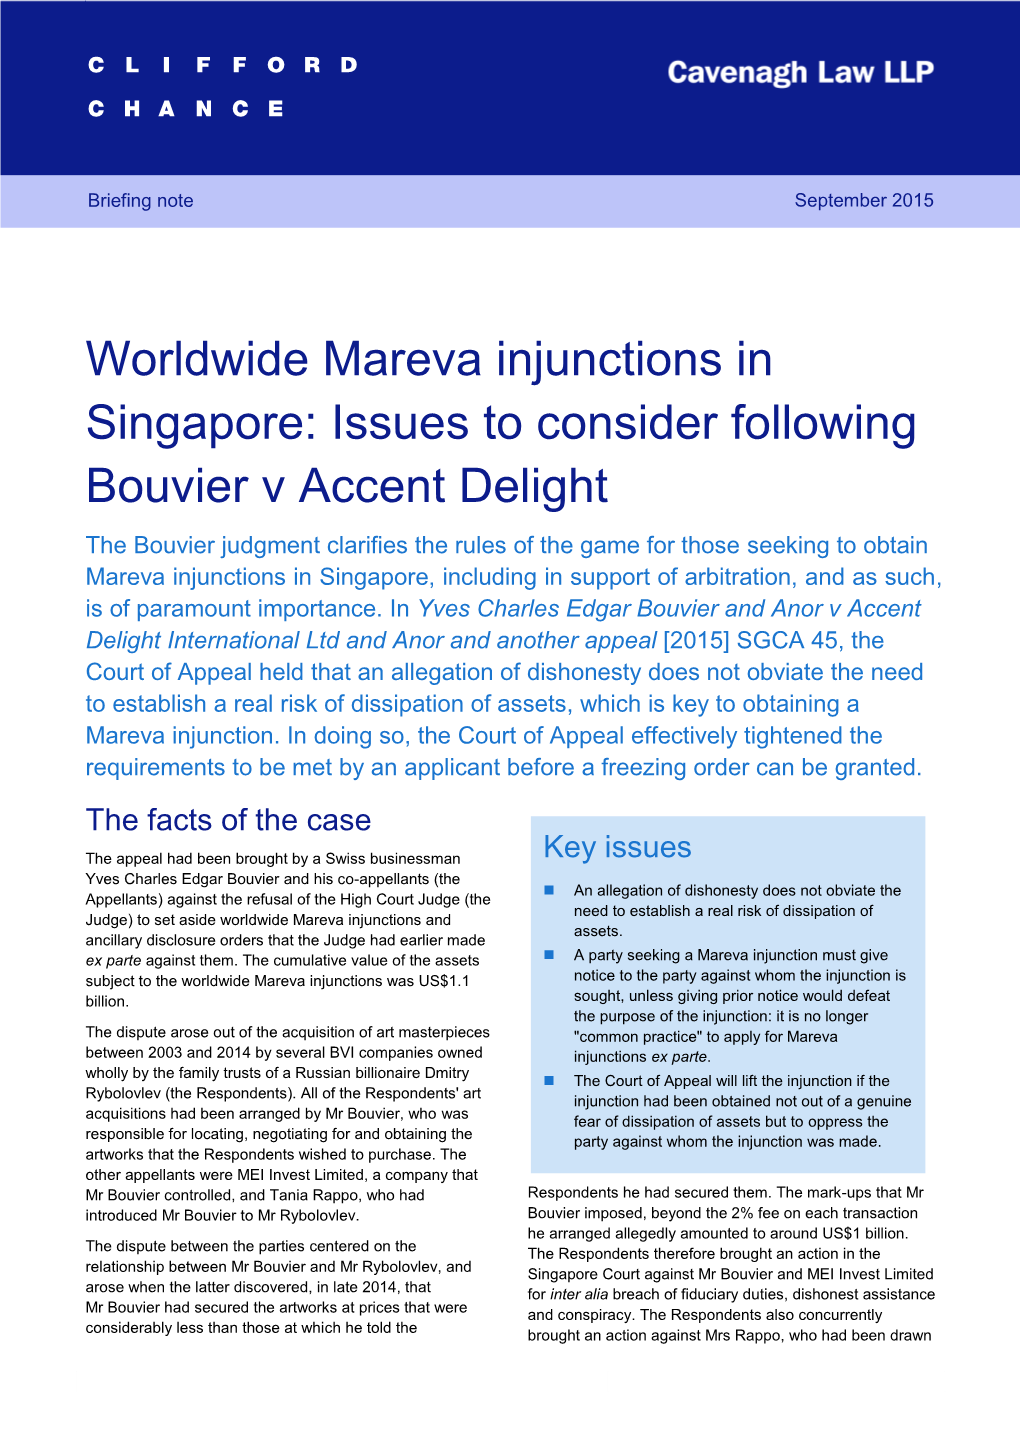 Worldwide Mareva Injunctions in Singapore: Issues to Consider Following Bouvier V Accent Delight 1